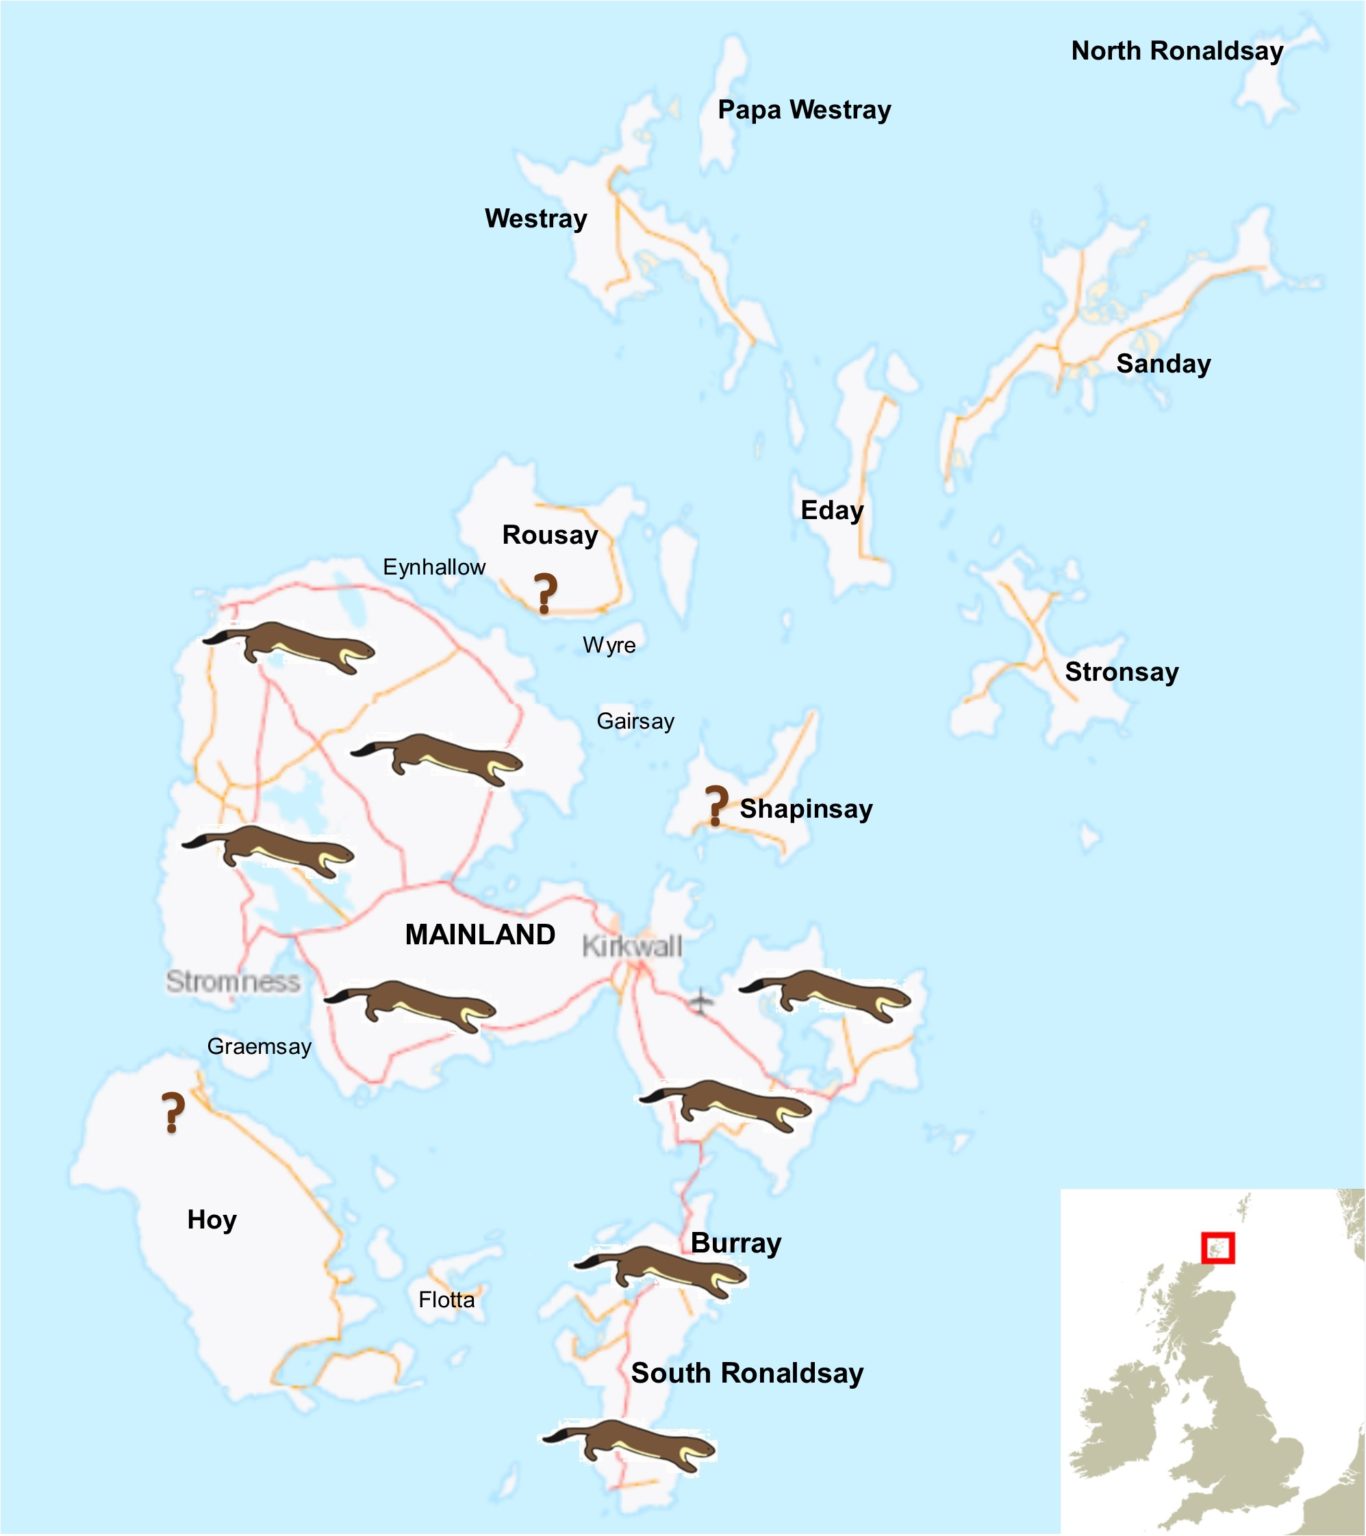 The map show the areas affected and at risk of a stoat invasion.